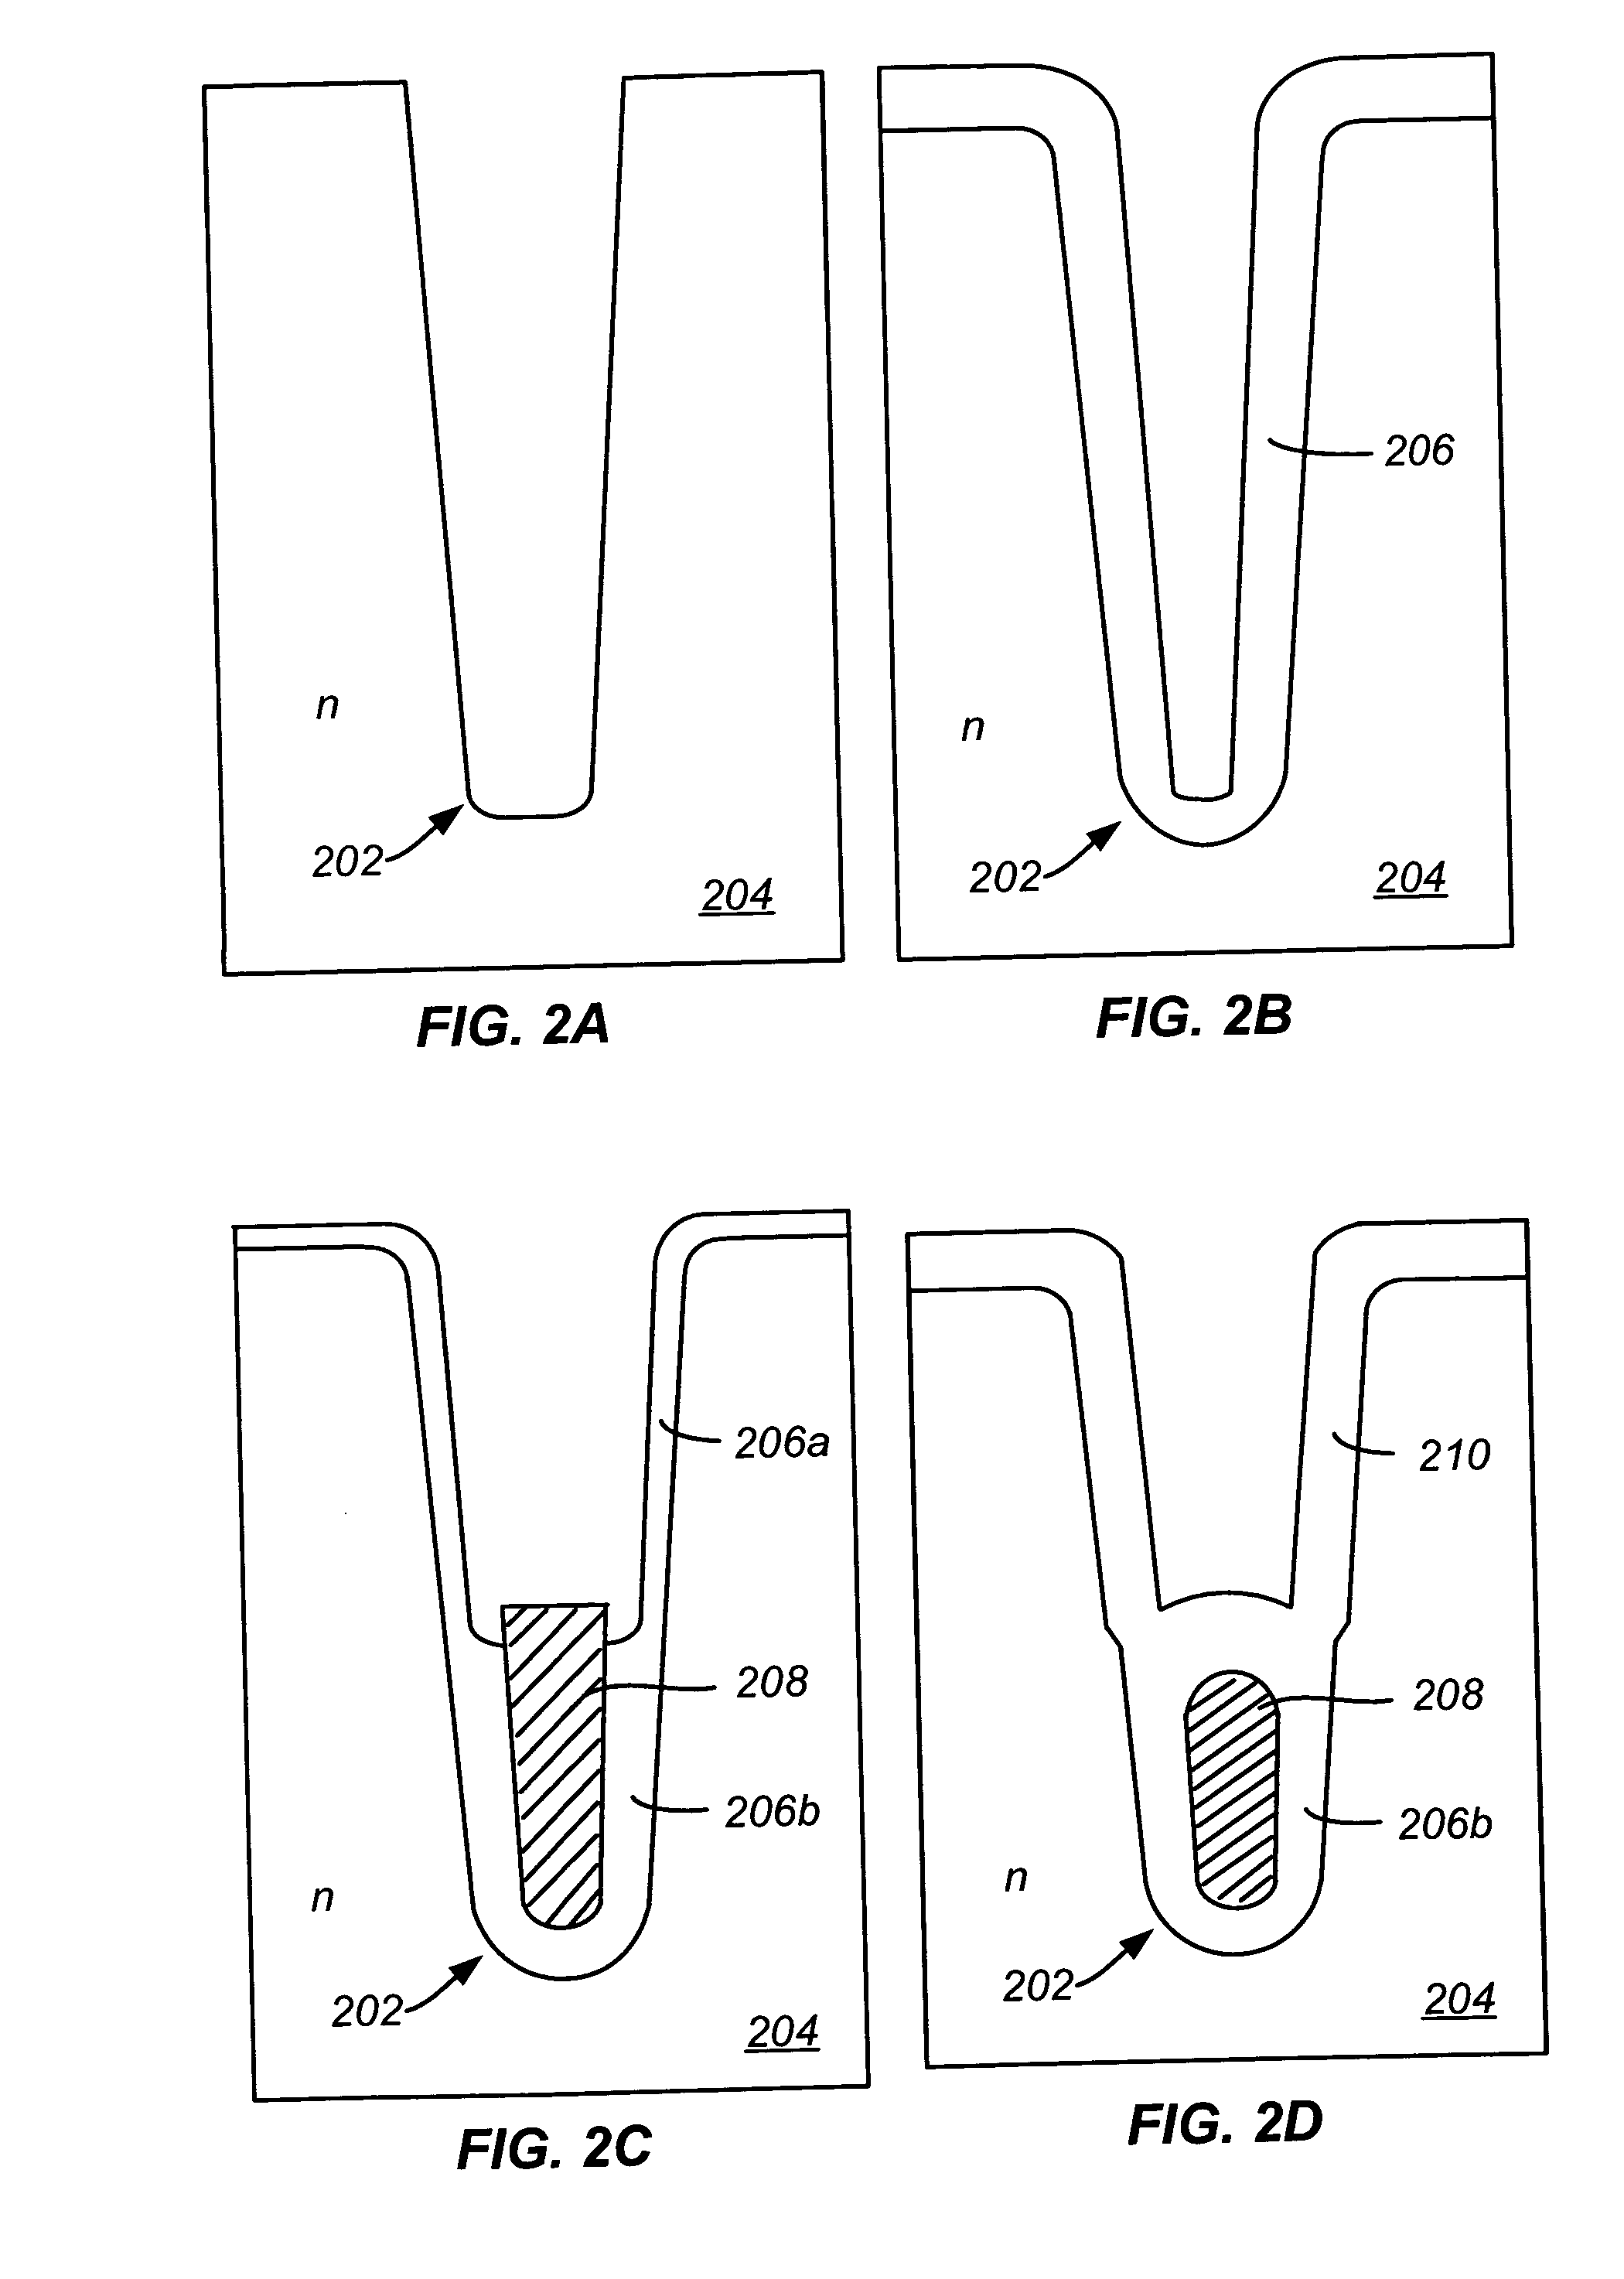 Structure and method for forming inter-poly dielectric in a shielded gate field effect transistor